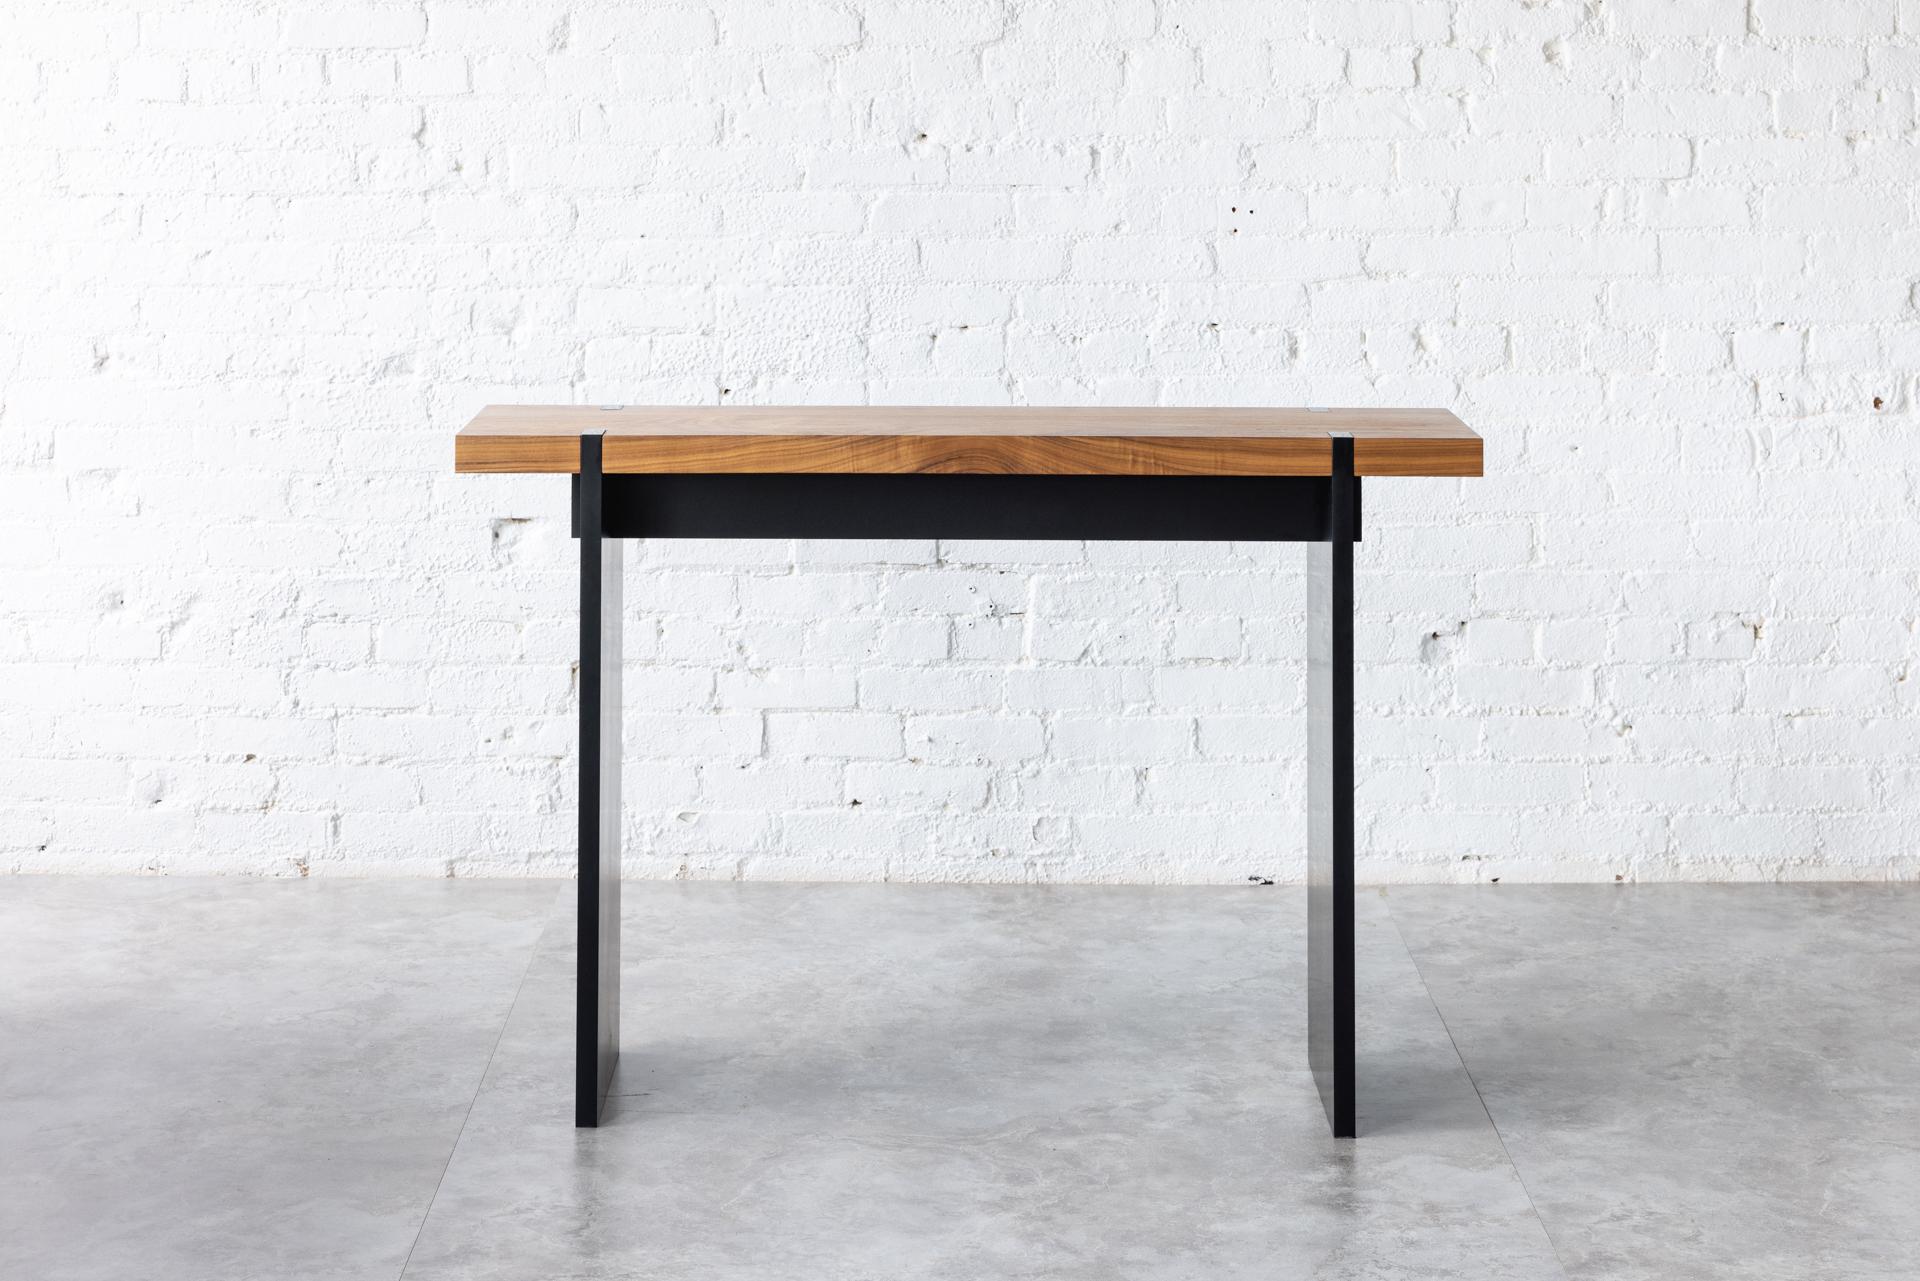 The Tillikum Black Console in black walnut features a Black Walnut solid wood top set on a matte black frame and legs. The minimalist design by Kirk Van Ludwig combines these elements to create a modern entrance console. 

Perfect attention-grabbing